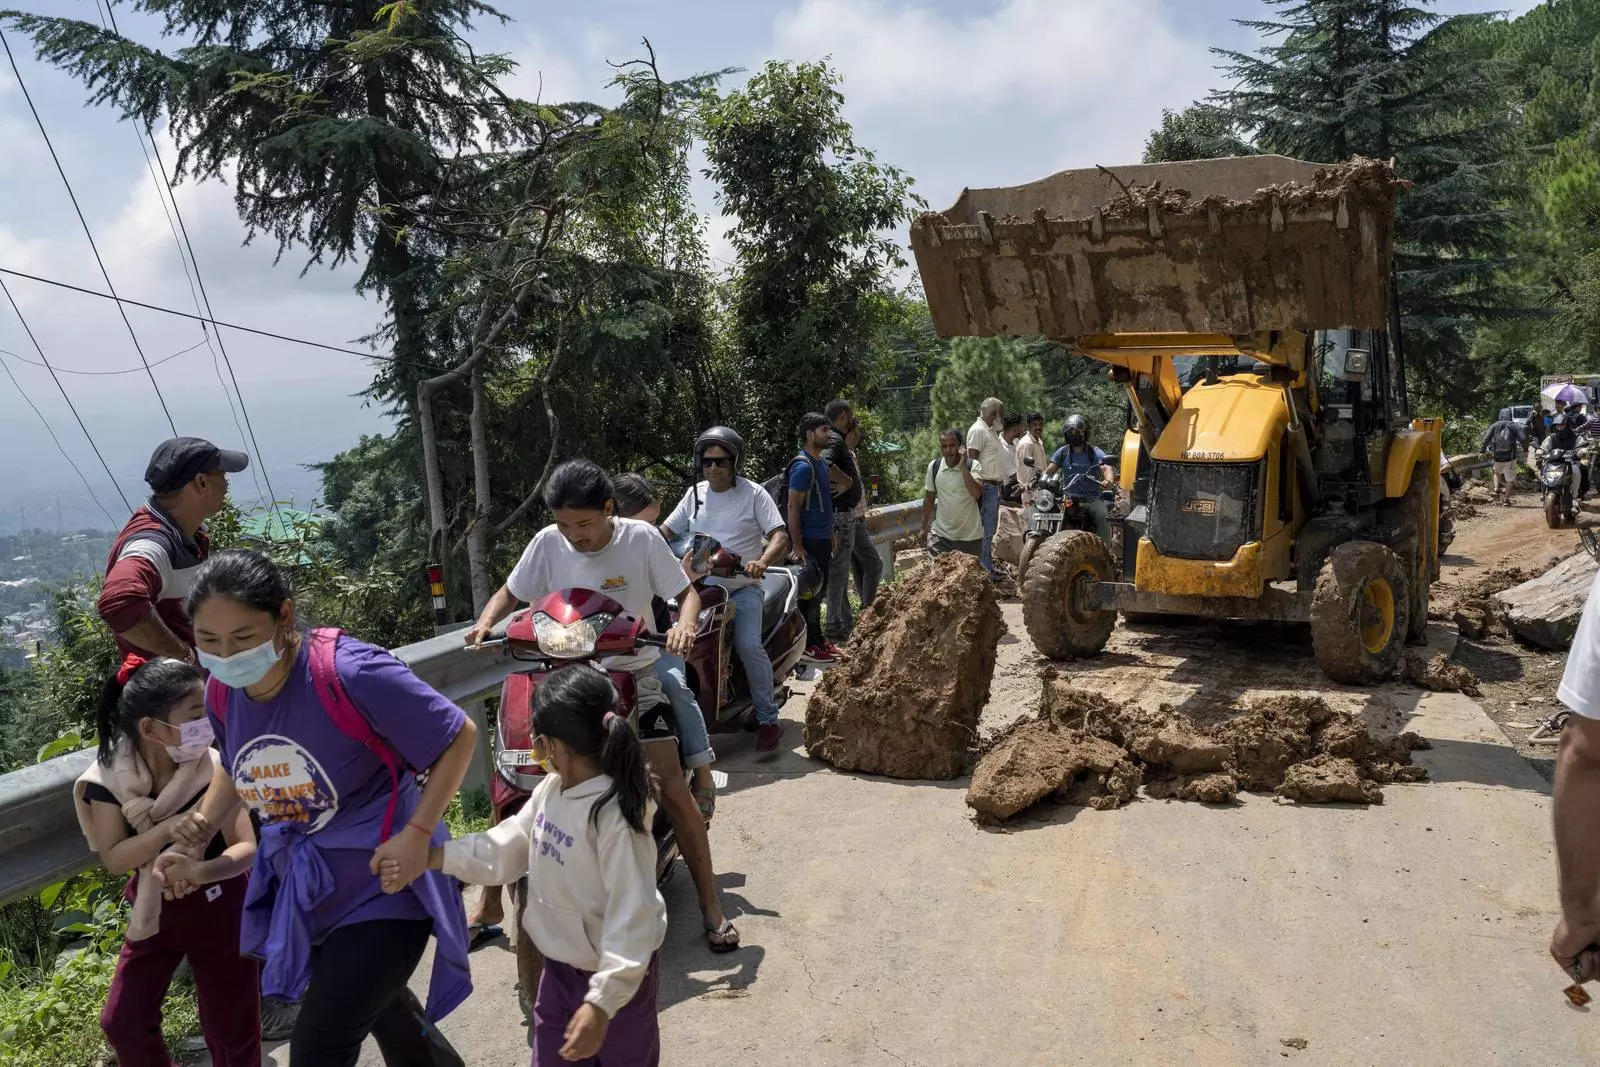 People rush past an earthmover clearing a road of a big rock in Dharamshala due to monsoons.